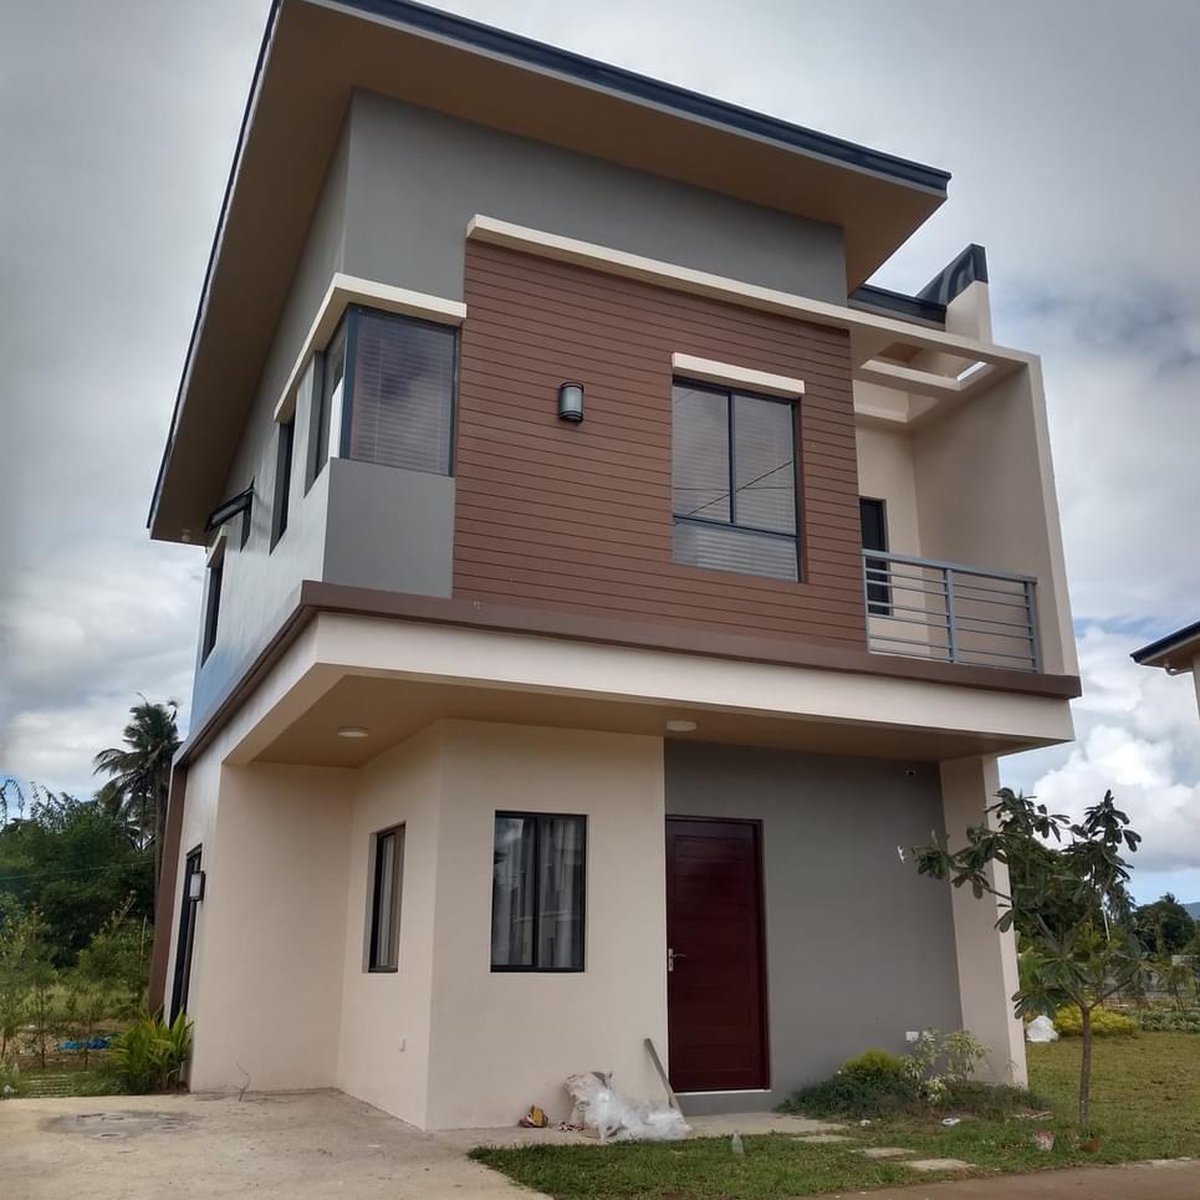 3 Bedroom Single Attached House for Sale in Alaminos Laguna